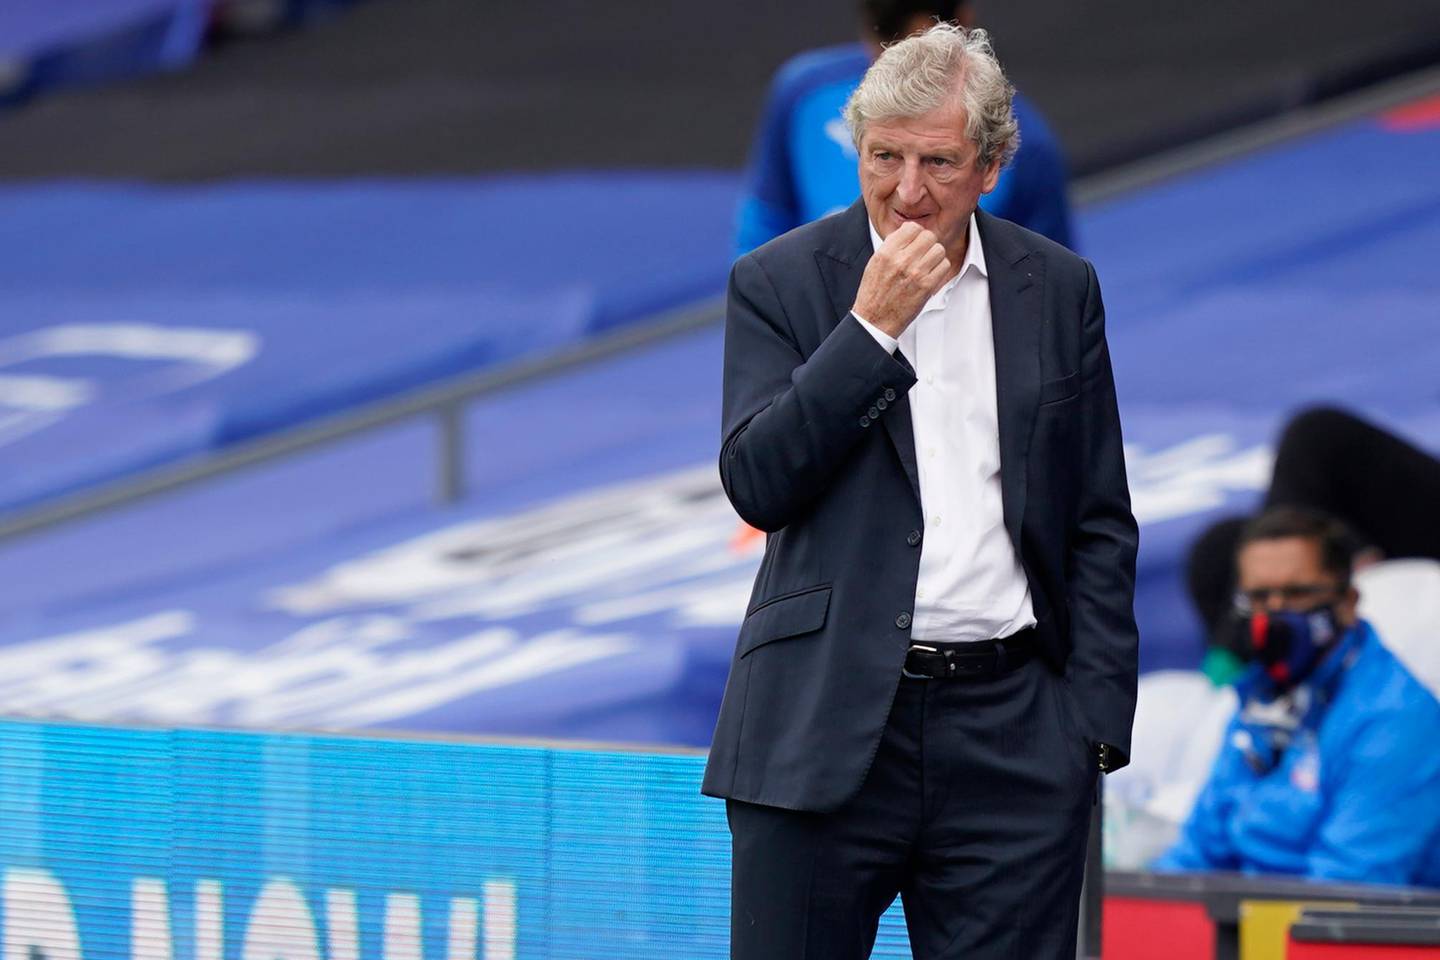 Crystal Palace's manager Roy Hodgson reacts during the English Premier League soccer match between Crystal Palace and Tottenham at the Selhurst Park stadium in London, Sunday, July 26, 2020. (Will Oliver/Pool via AP)